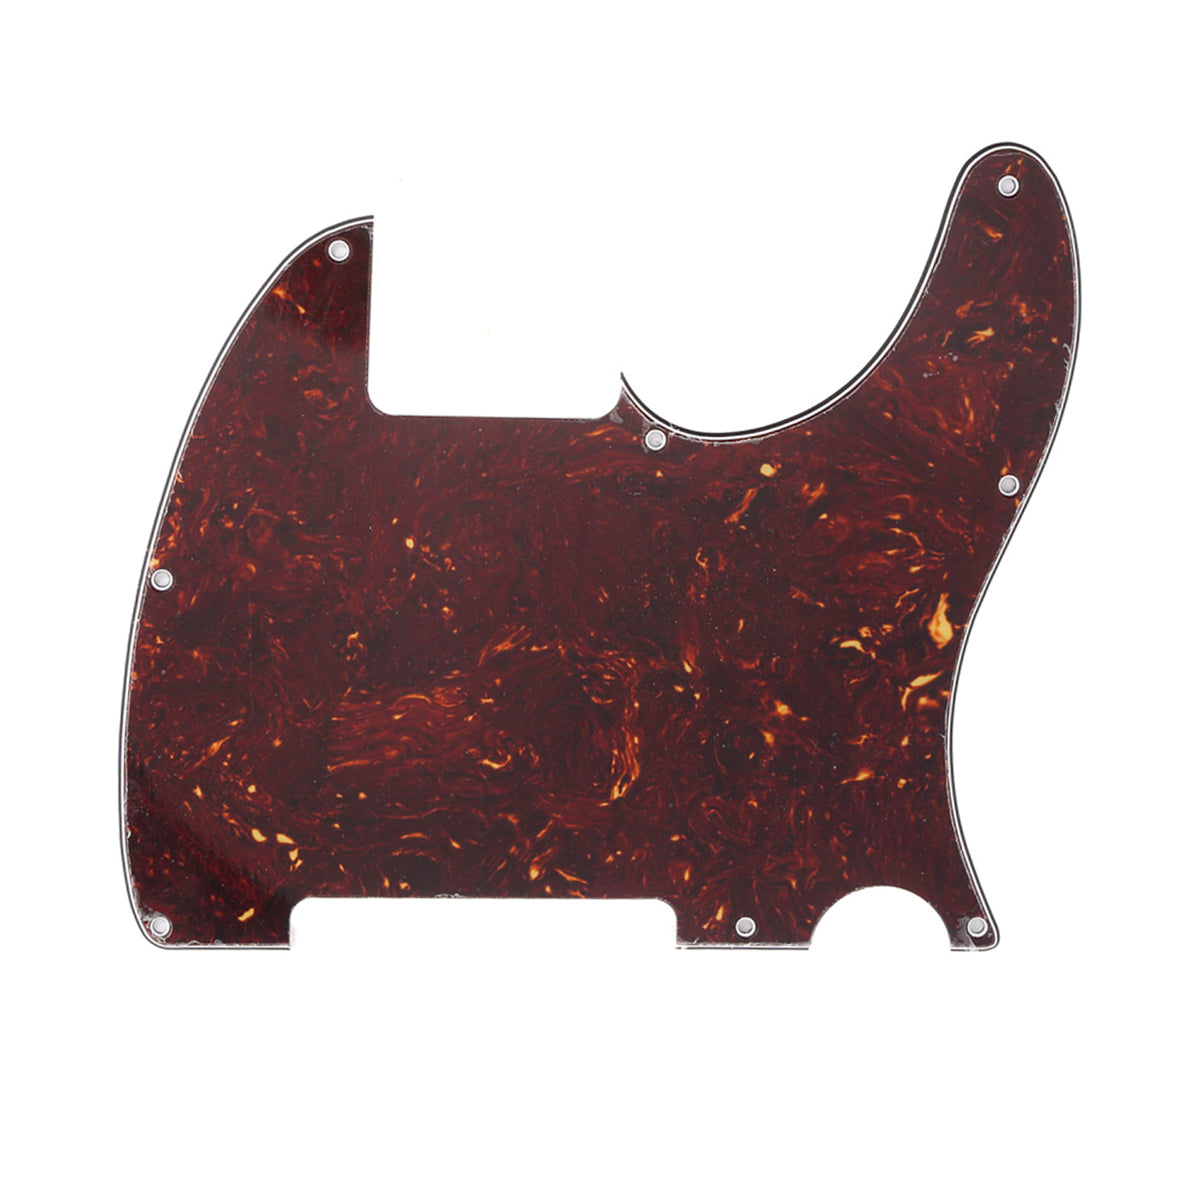 Musiclily 8 Hole Tele Pickguard Blank for Fender USA/Mexican Telecaster Esquire Guitar, 4Ply Tortoise Shell